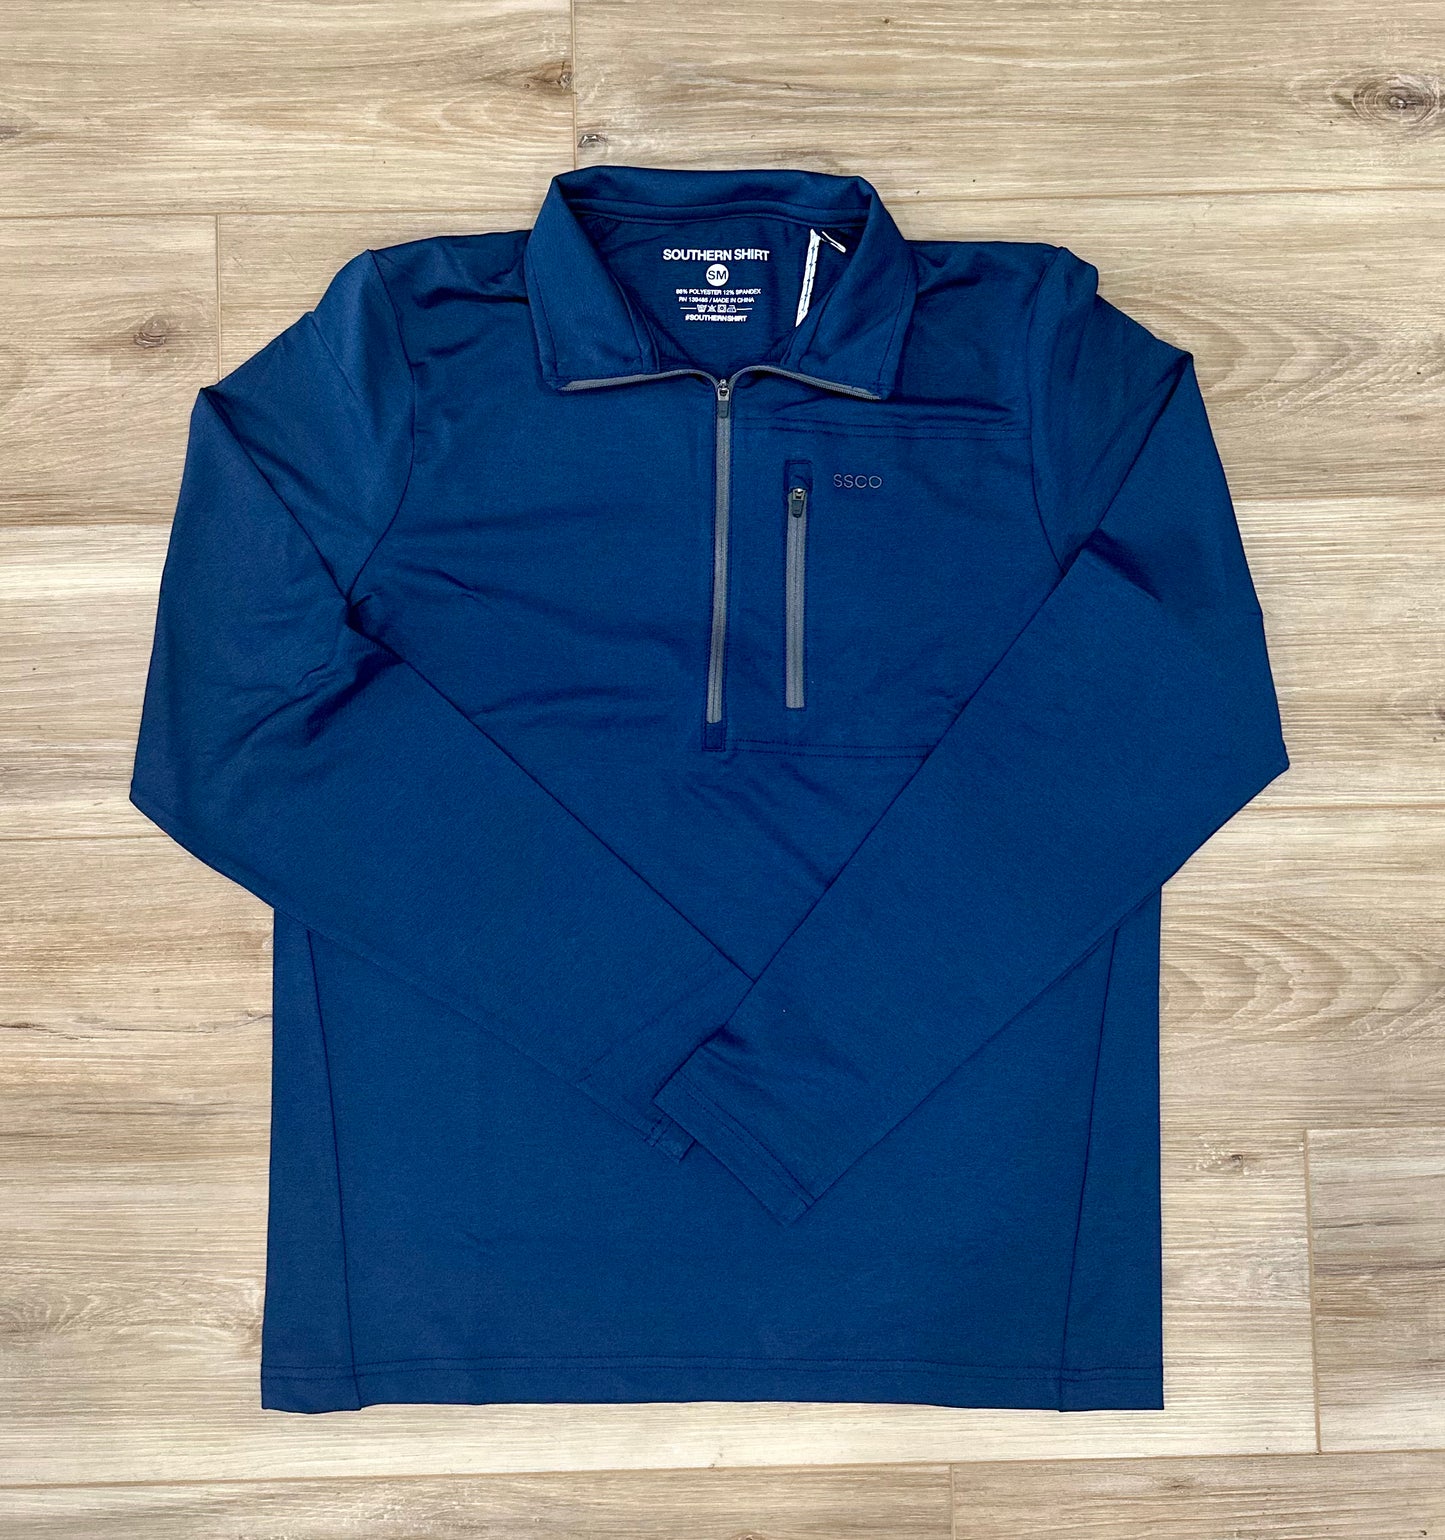 Southern Shirt Co.- Cart Club Performance Pullover, Esquire Navy